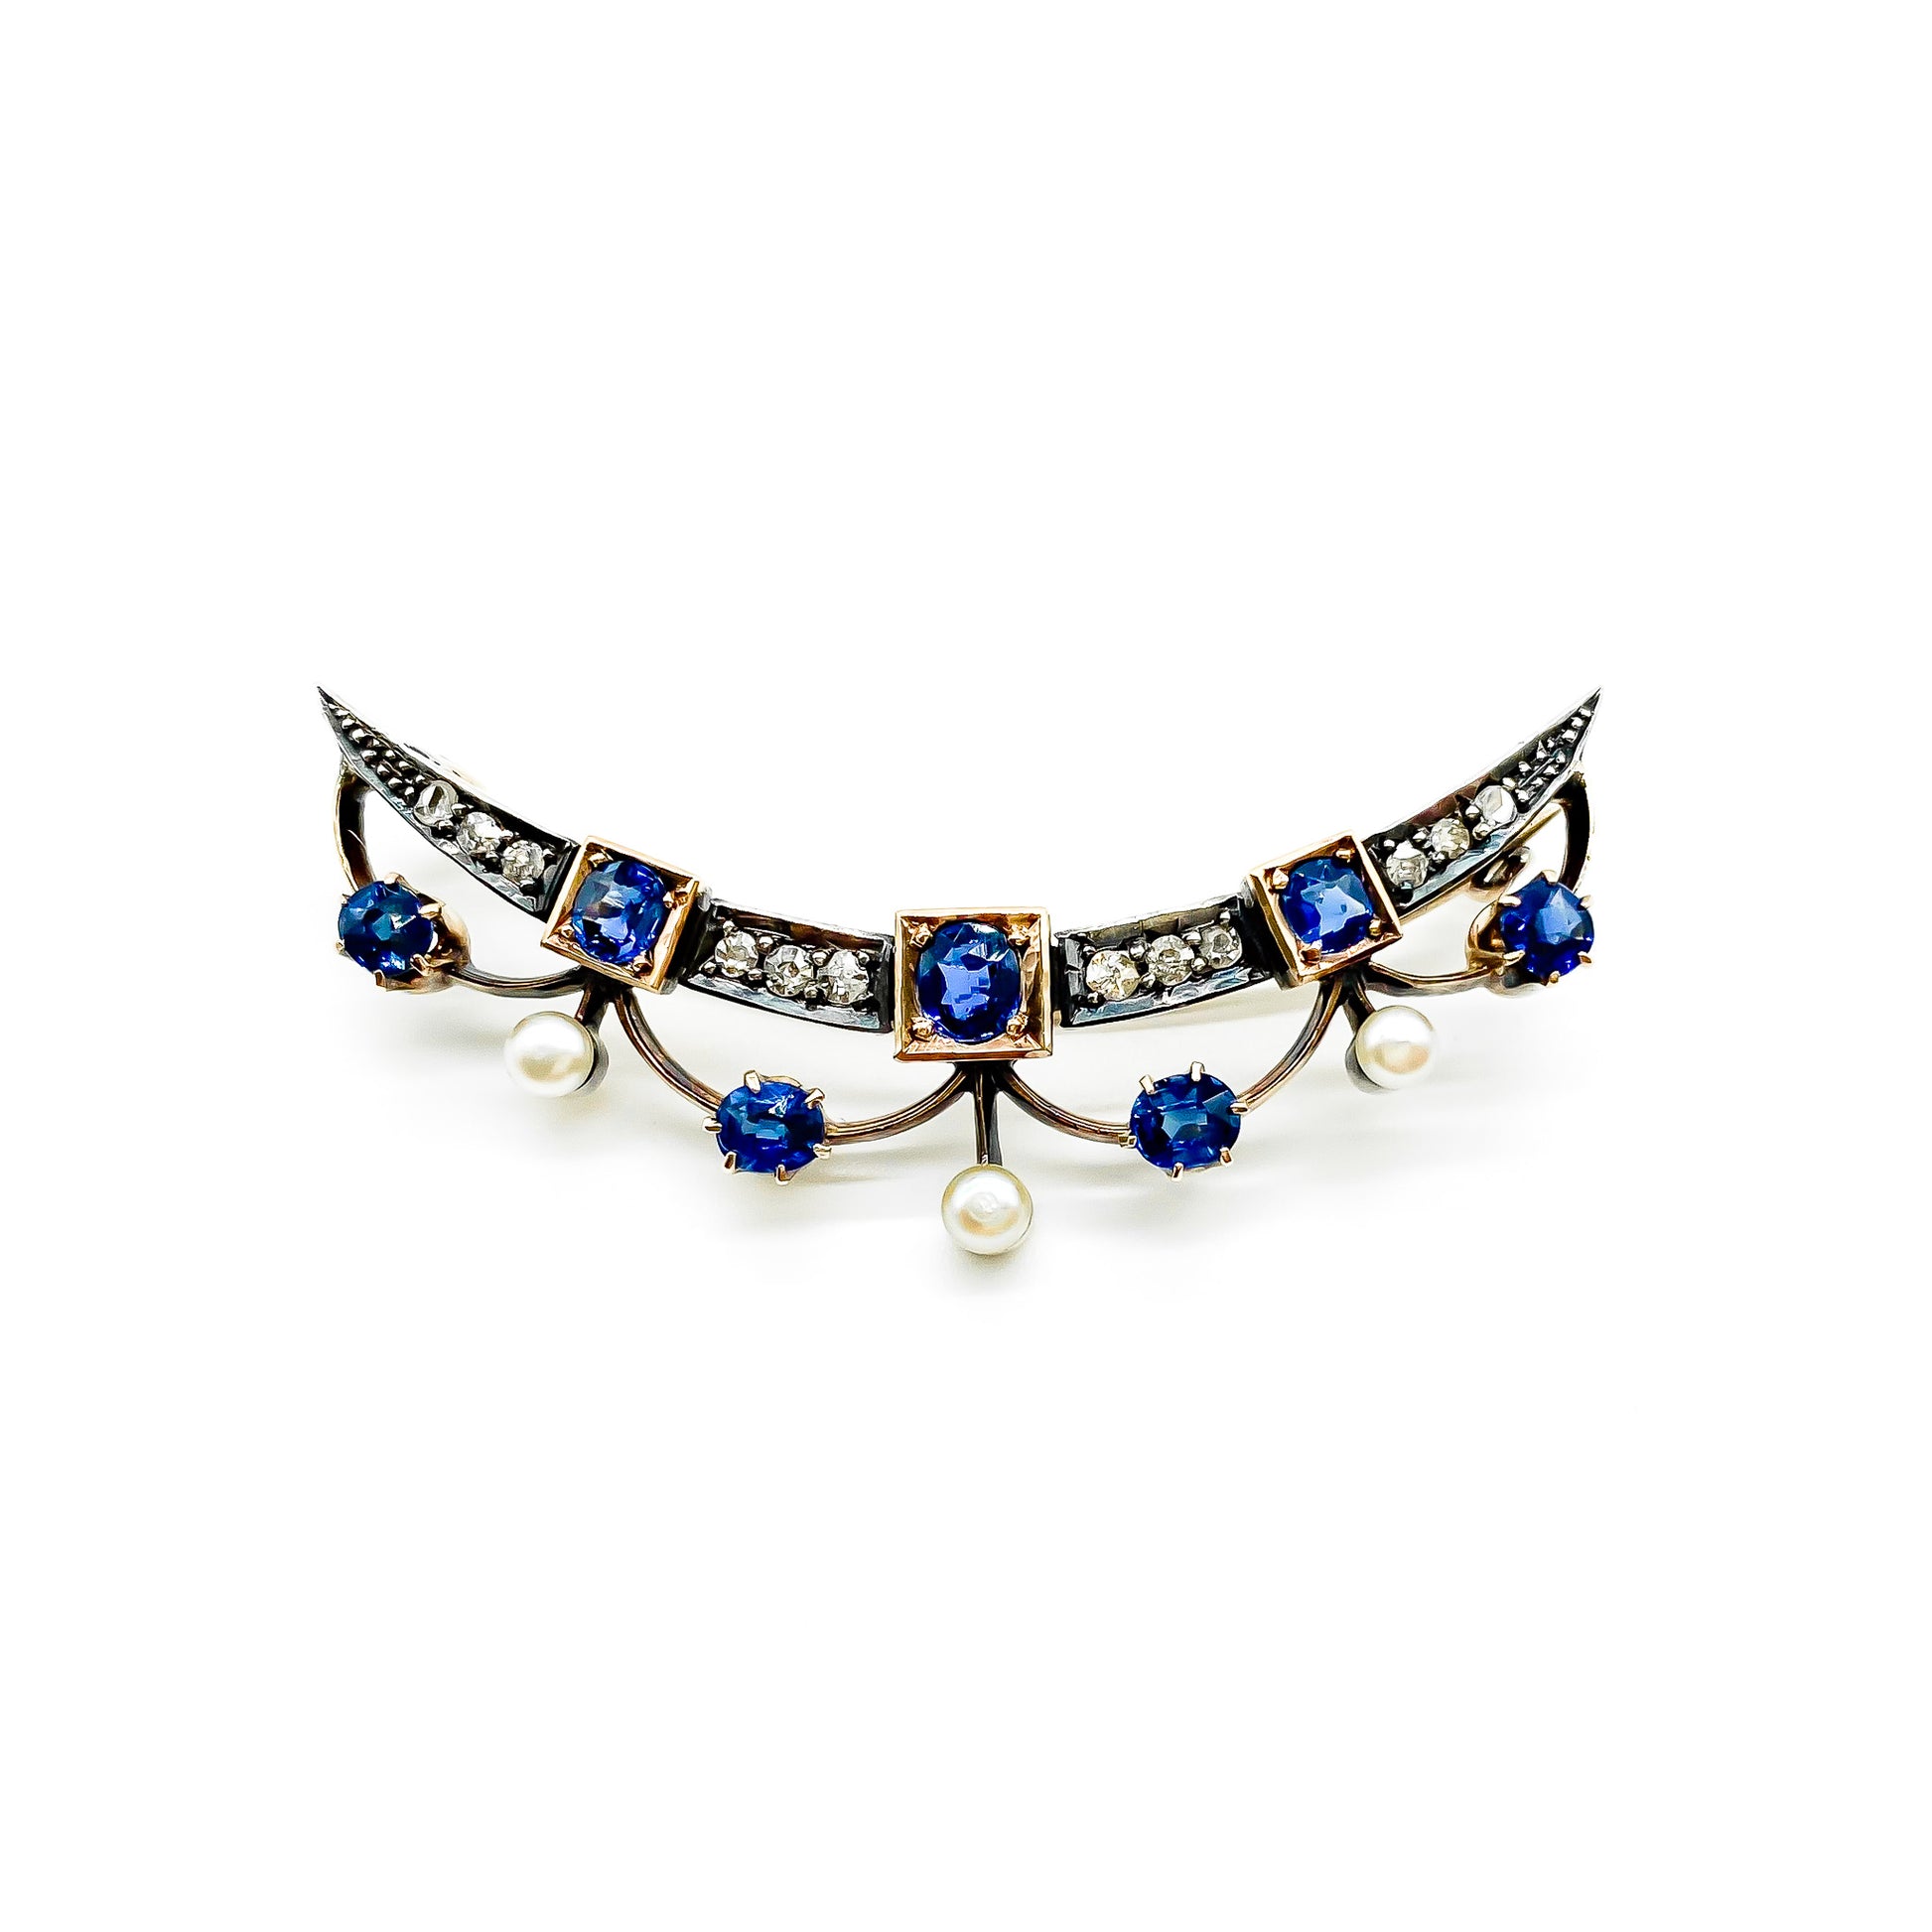 Very pretty Victorian 9ct rose gold and silver crescent brooch set with cornflower blue sapphires, diamonds and seed pearls.